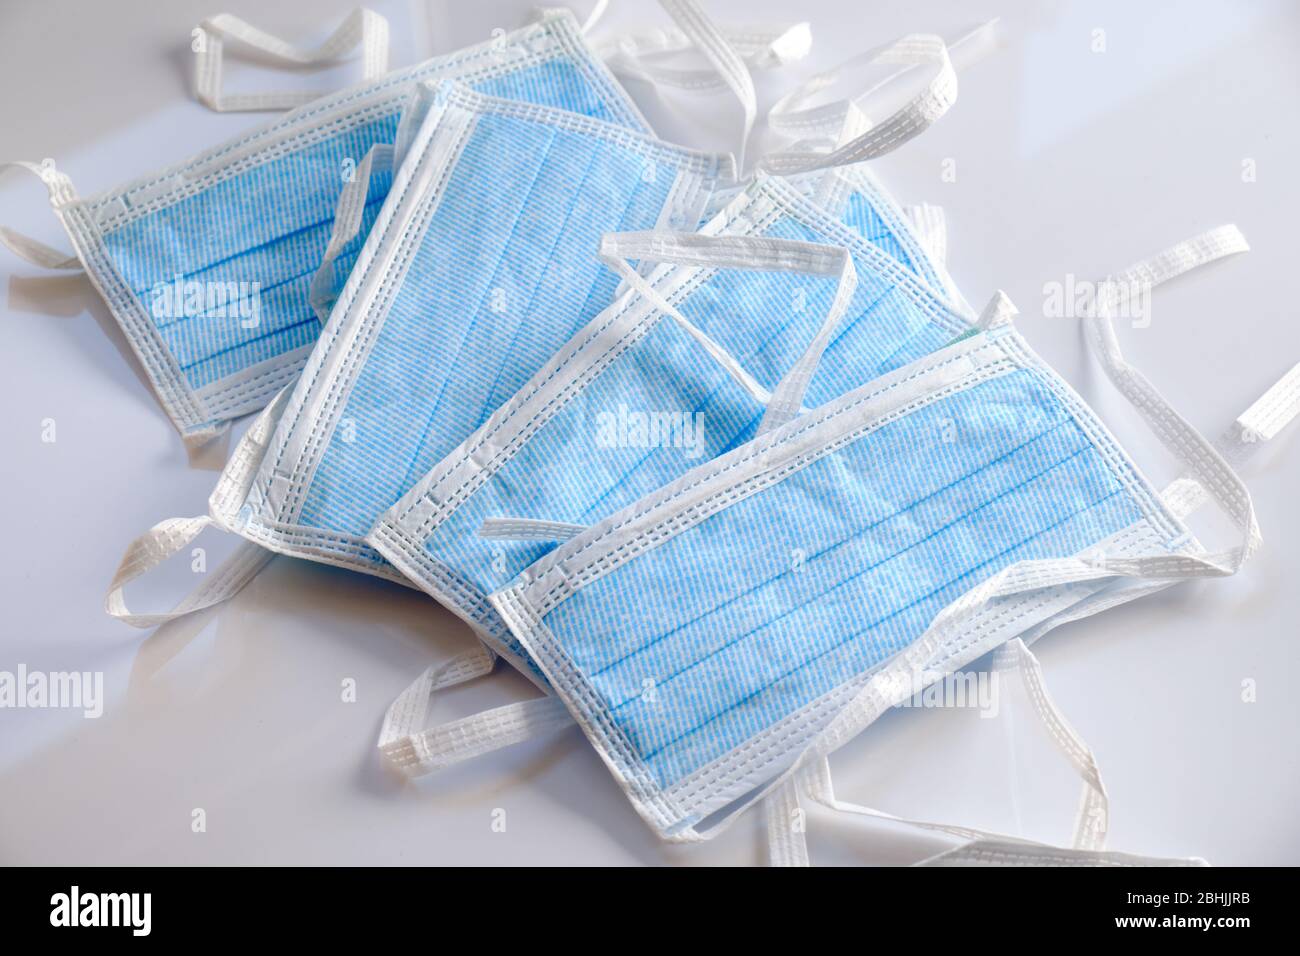 A stack of disposable face masks lying on white ground. Seen in Germany in April. Stock Photo